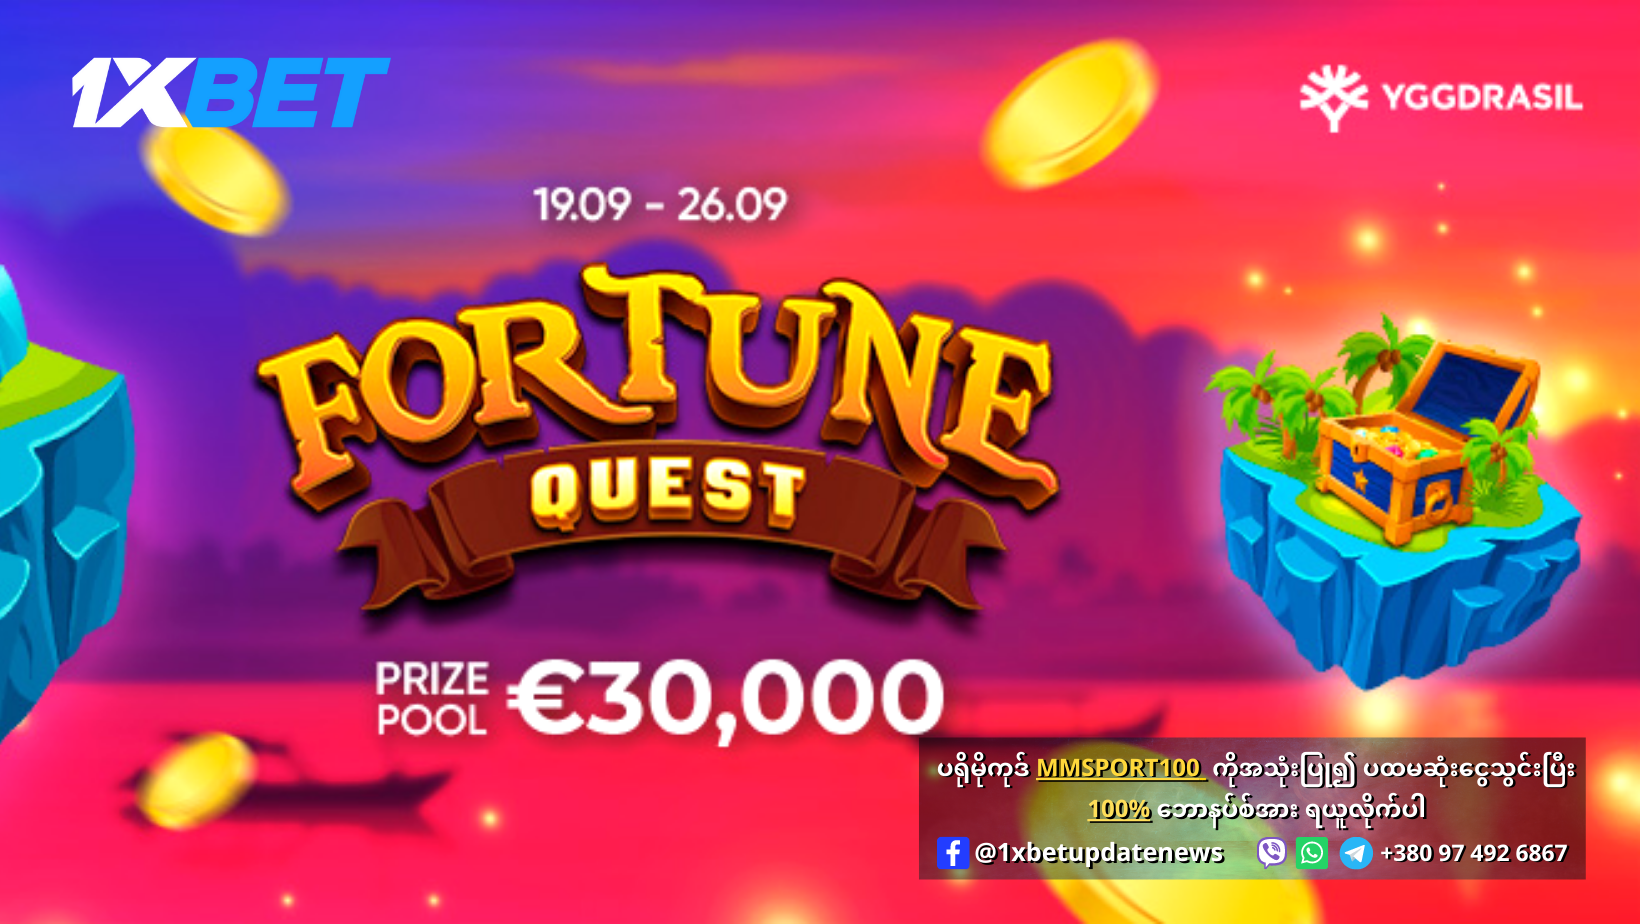 Grand Fortune Quest Promotion